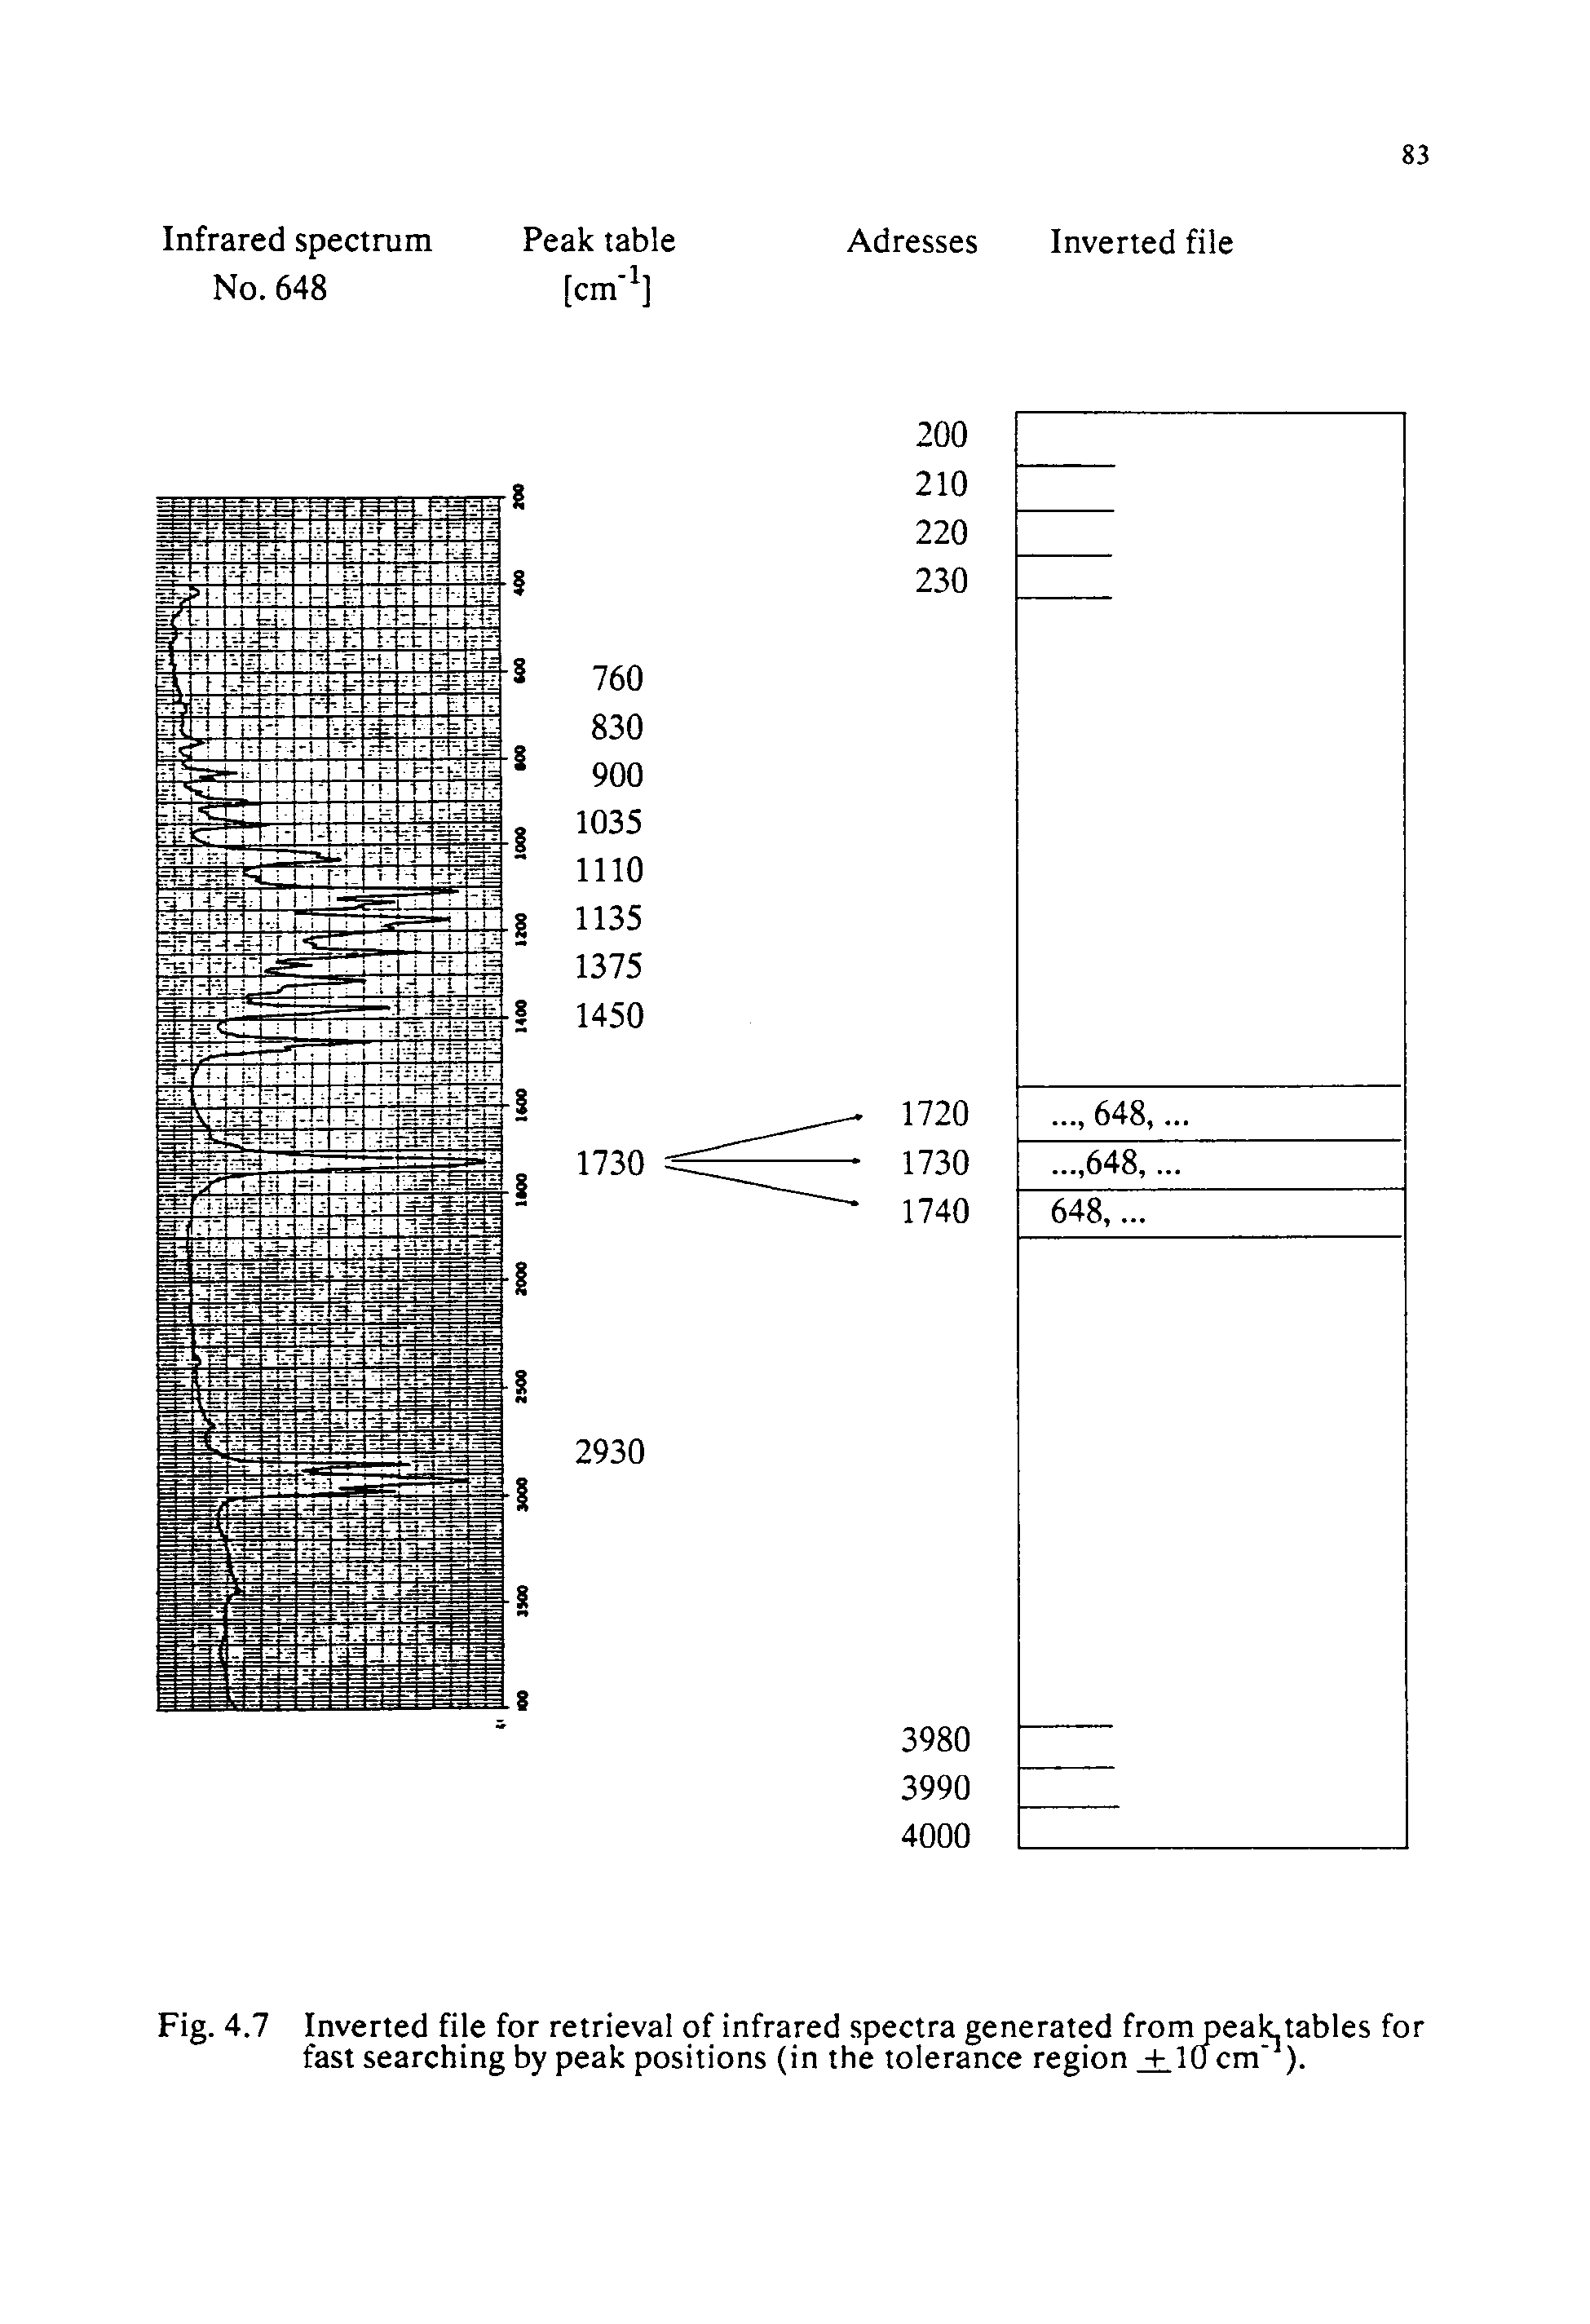 Fig. 4.7 Inverted file for retrieval of infrared spectra generated from pealc tables for fast searching by peak positions (in the tolerance region +10 cm"1).